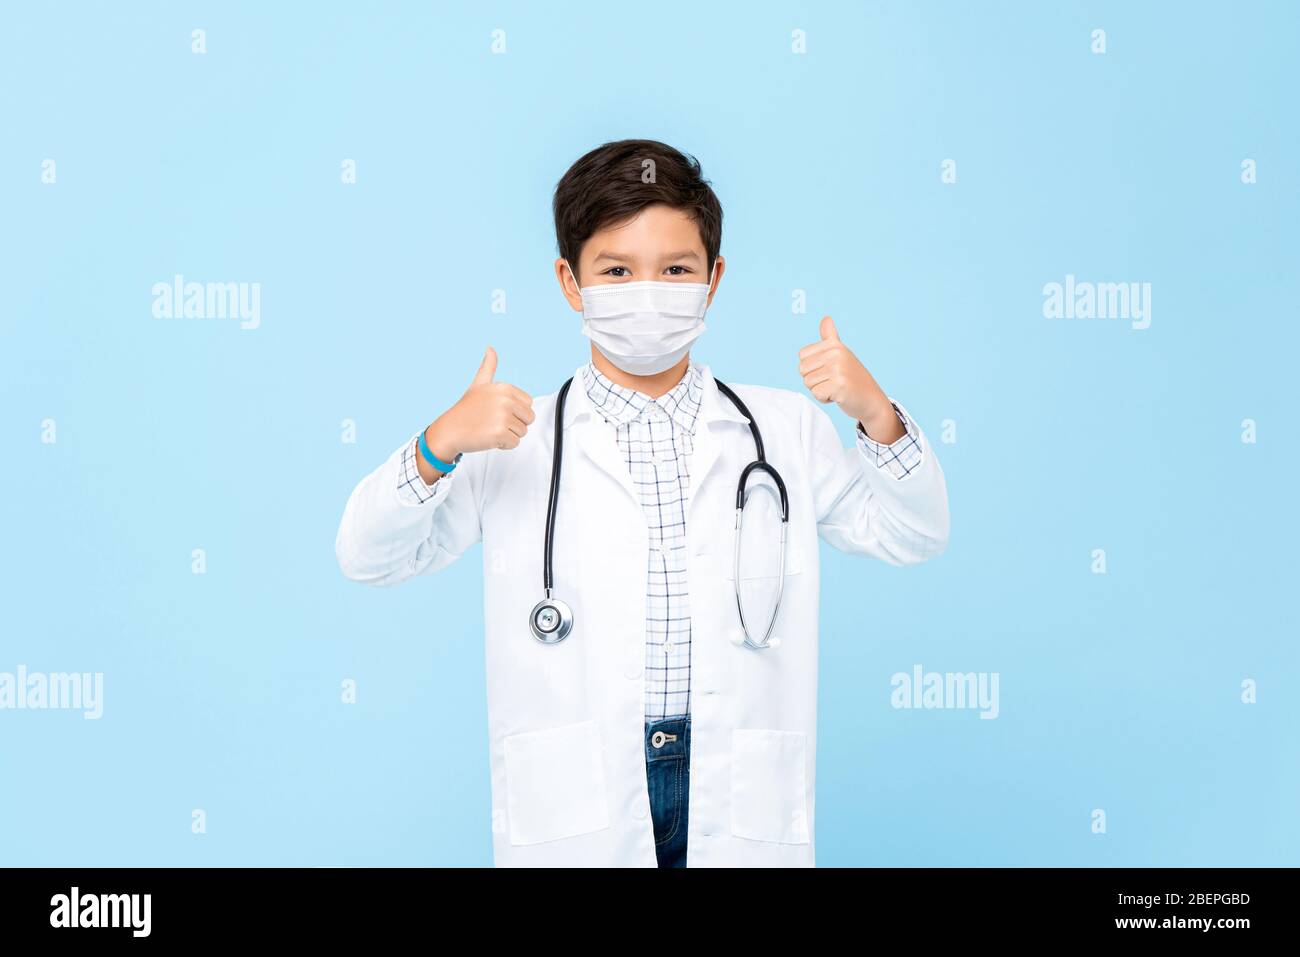 Cute boy doctor wearing medical mask and giving thumbs up isolated on light blue background Stock Photo